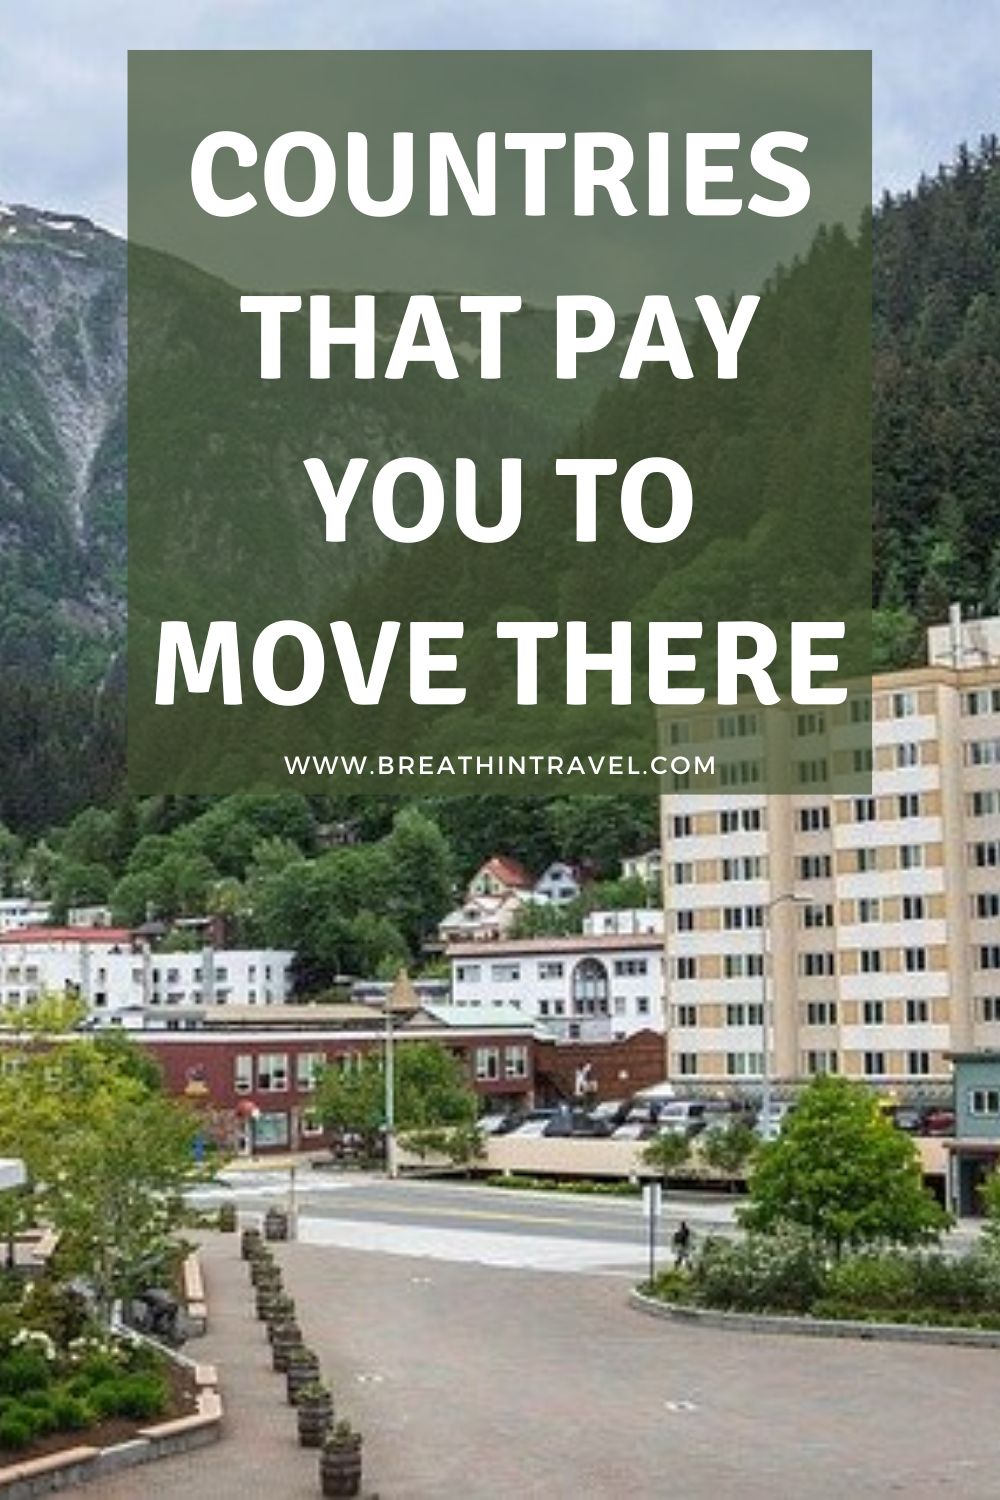 What Are 10 Countries That Will Pay You to Move There? Get Up to